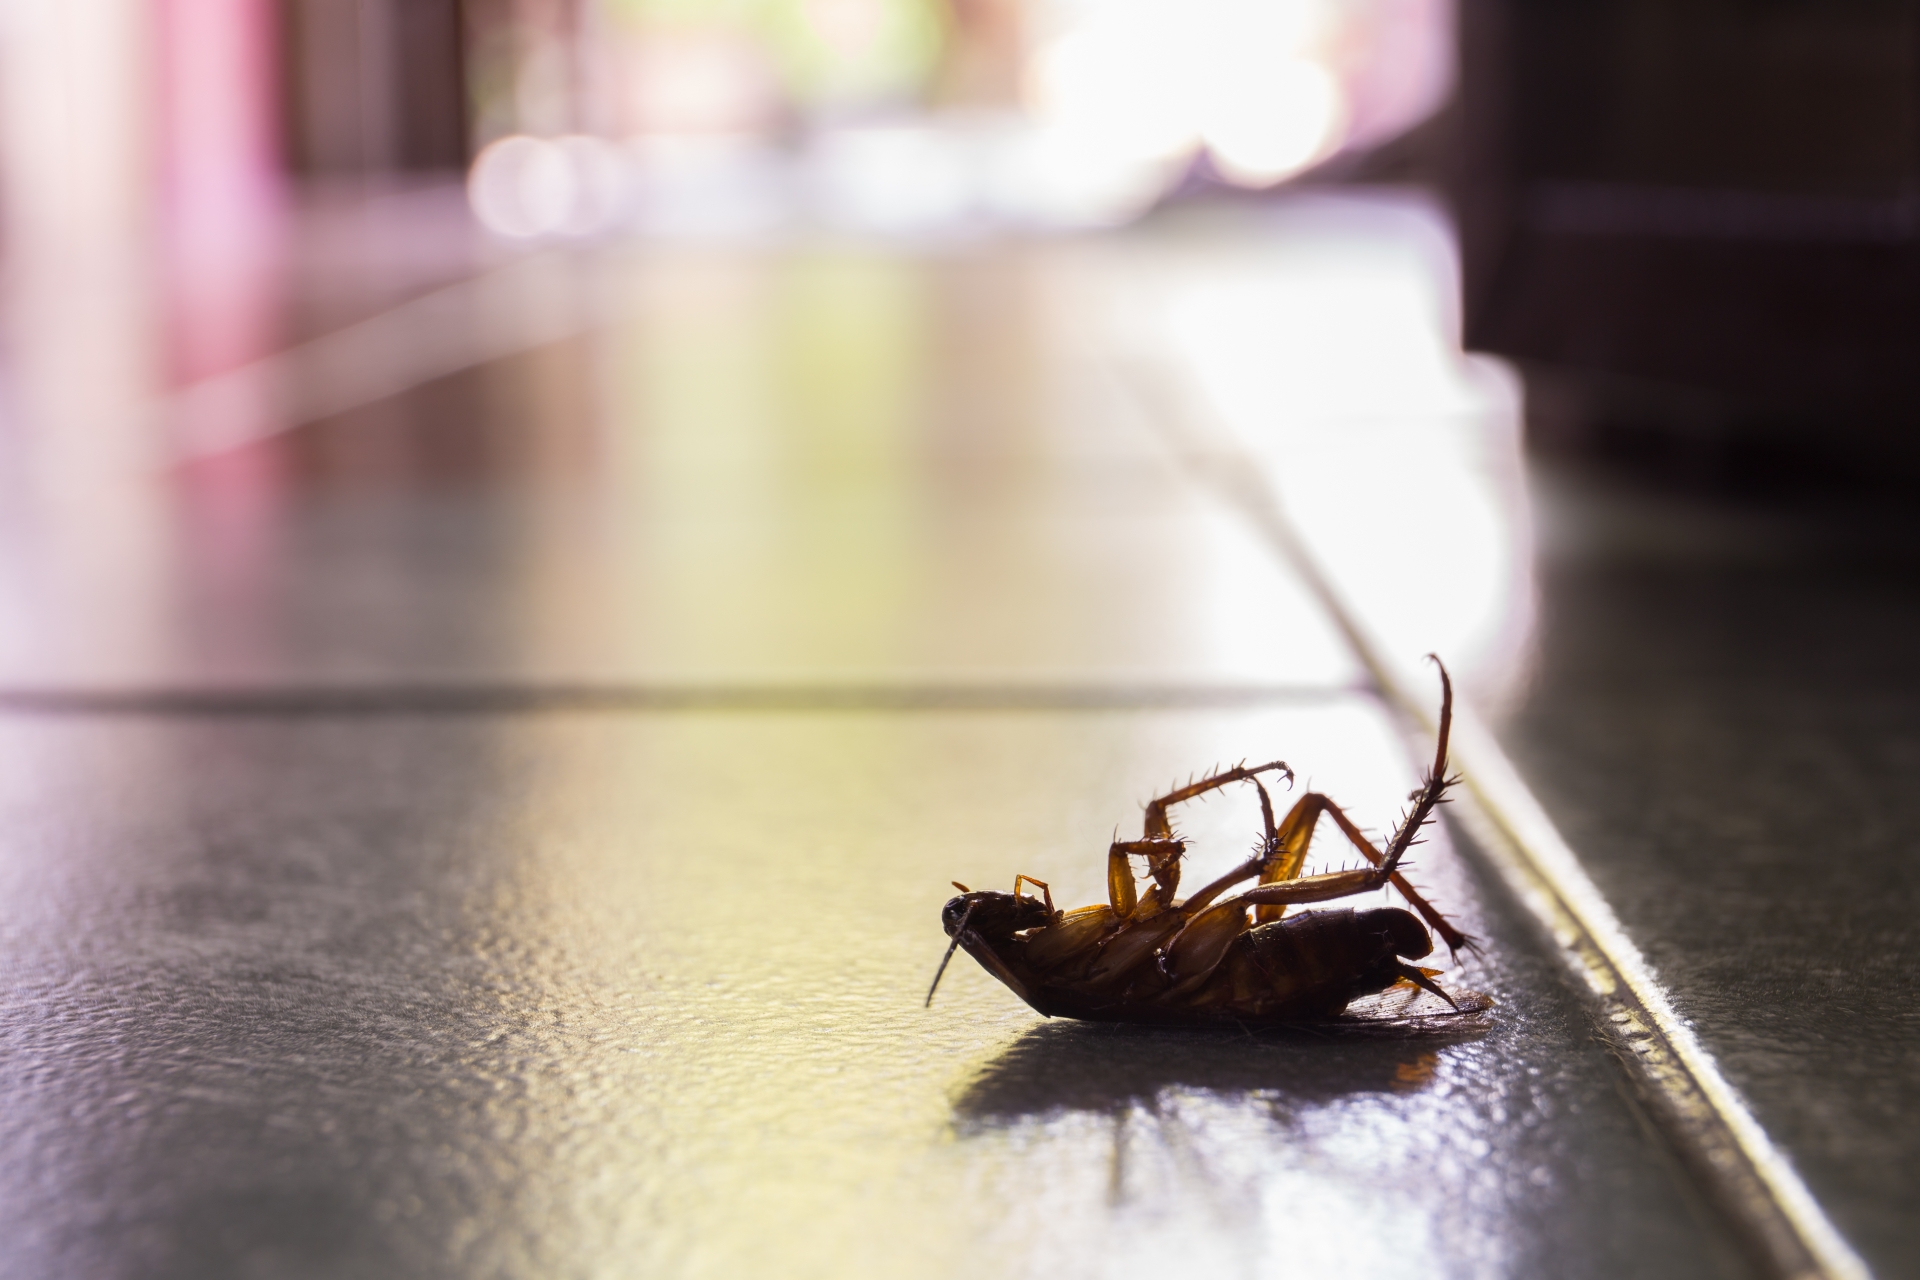 Cockroach Control, Pest Control in Banstead, Woodmansterne, SM7. Call Now 020 8166 9746